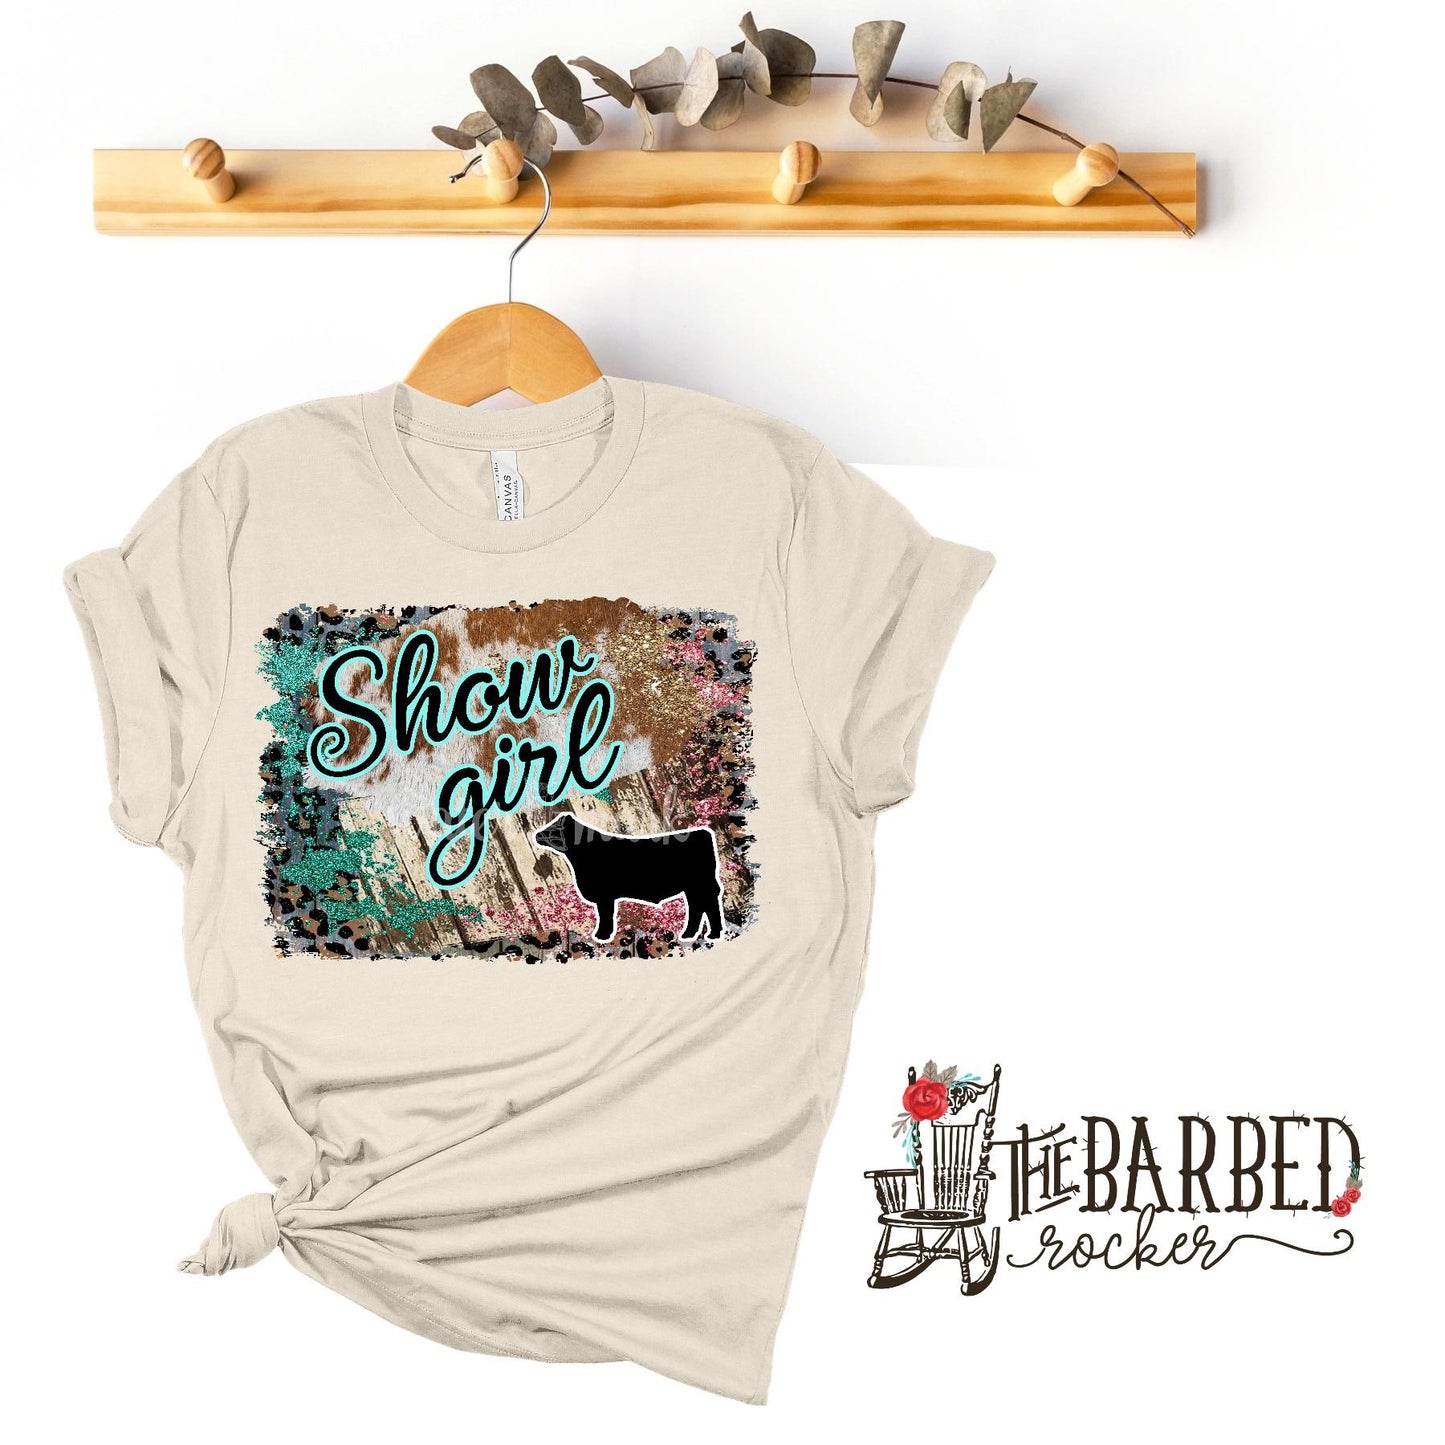 Youth Turquoise Pink "Show Girl" Steer Stockshow Show Mom T-Shirt